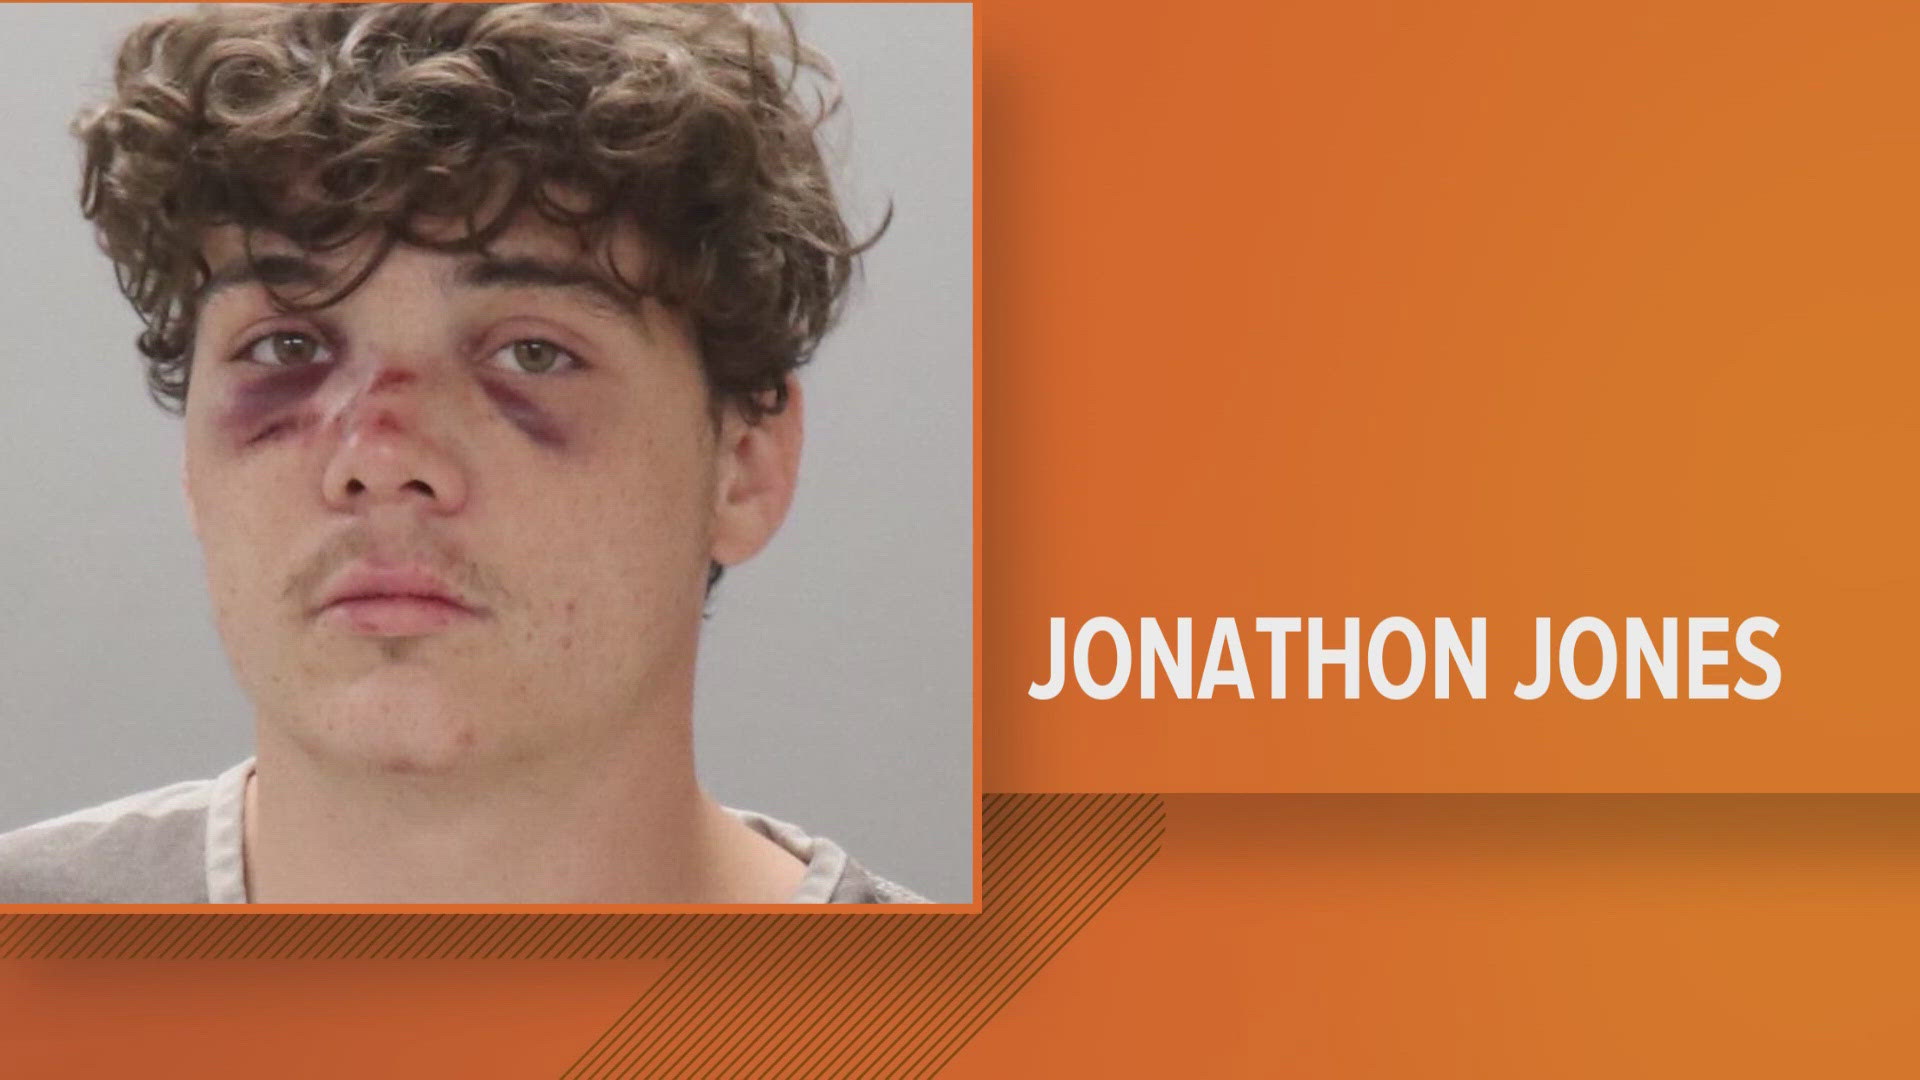 It was found out Monday morning that another person had died in the crash that killed a woman and her unborn child. Jonathon Jones is facing multiple charges.